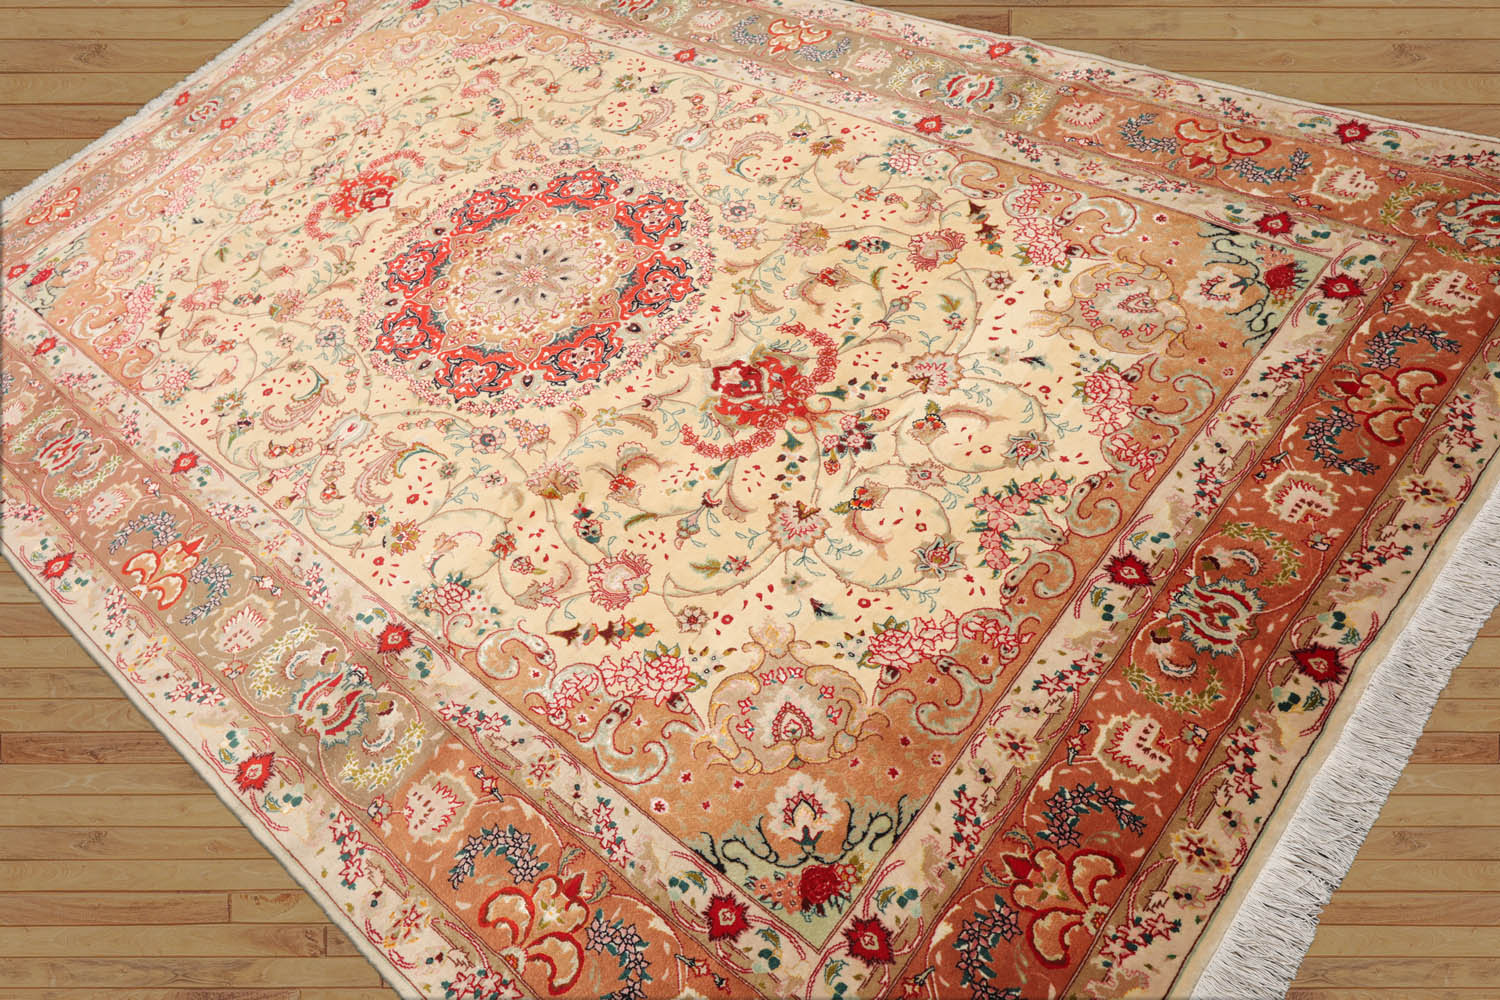 Bodine 6x9 Hand Knotted Wool and Silk Traditional Tabriz 300 KPSI Oriental Area Rug Ivory, Peach Color